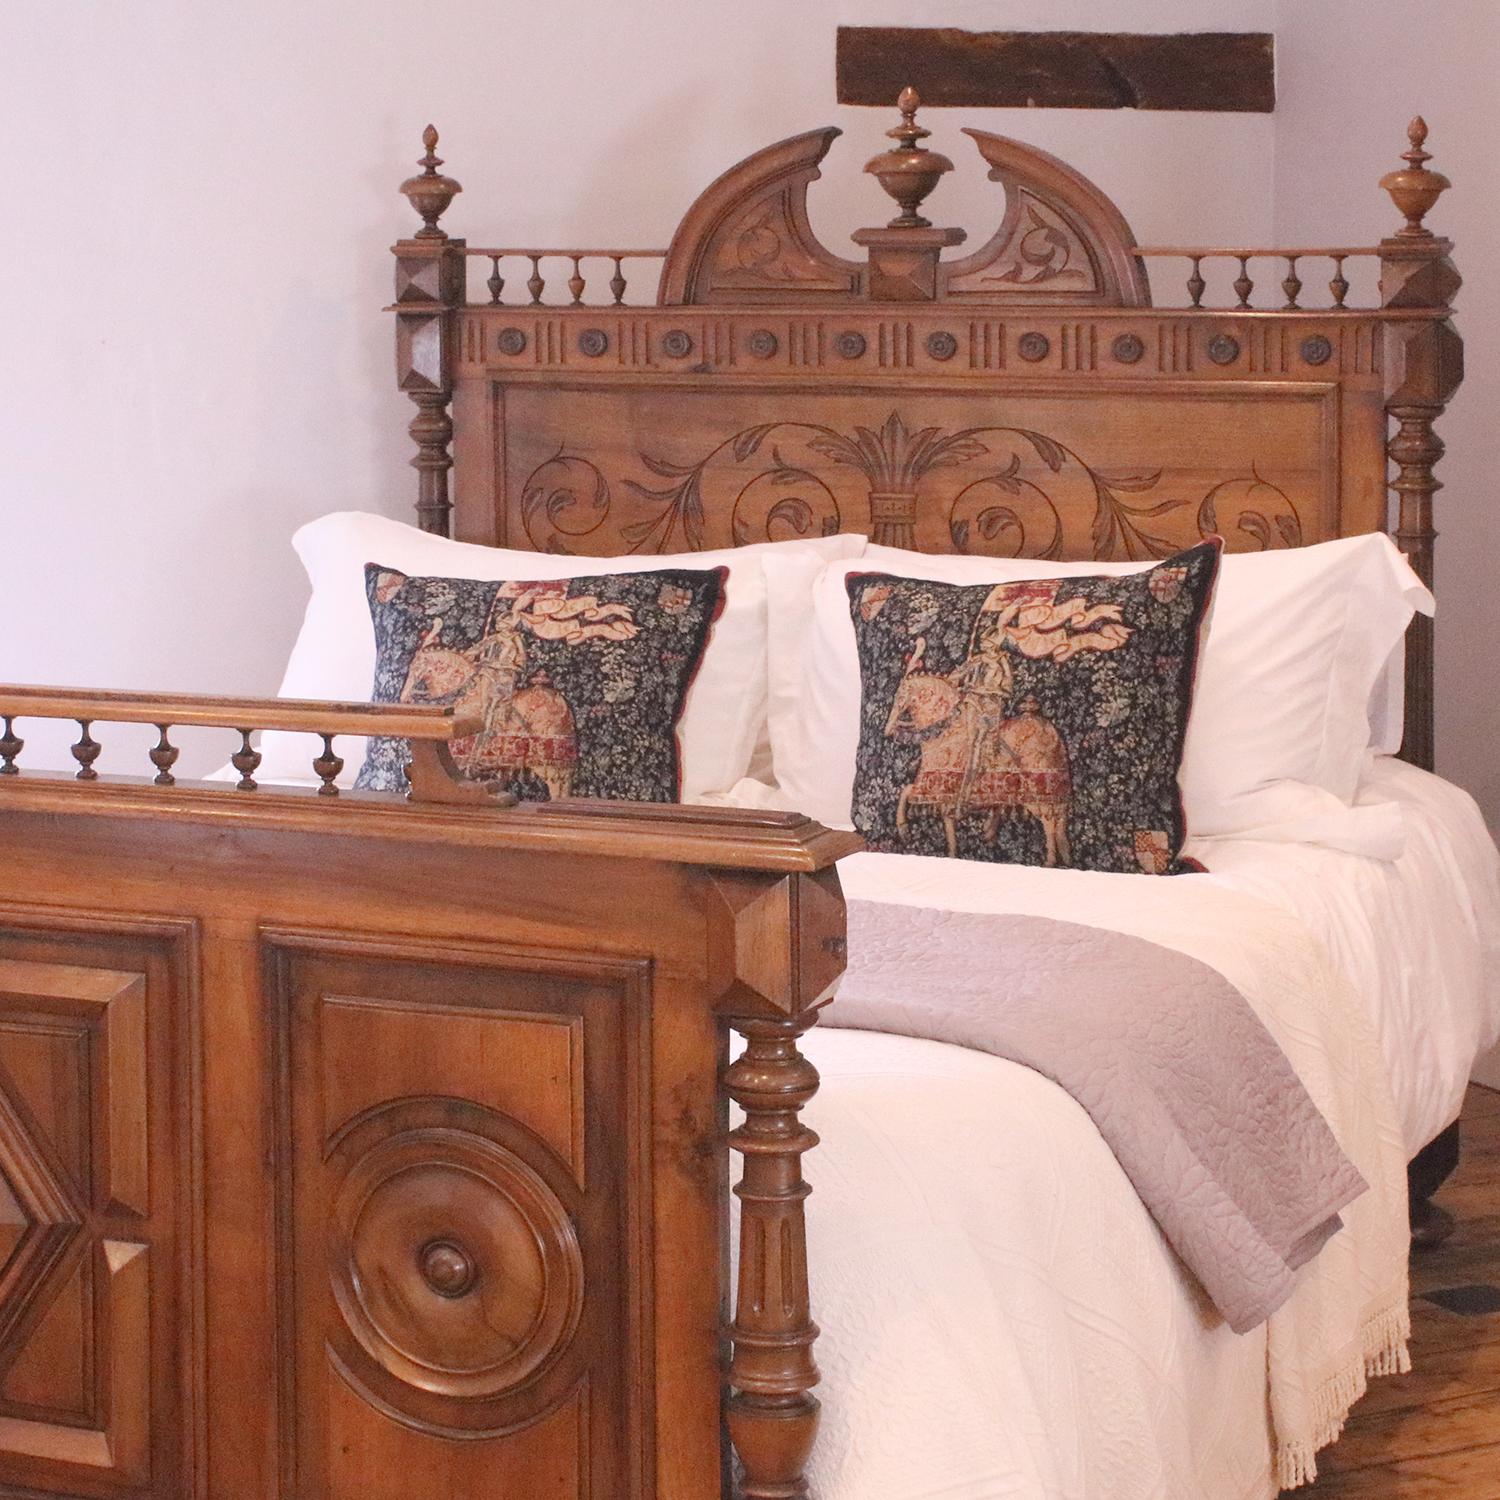 A Renaissance style bedstead in walnut with decoratively carved head panel, ornate pediment and finials, turned posts and fielded panels in the foot board. 

This bed accepts a British king size or American queen size, 5ft wide (60 inches or